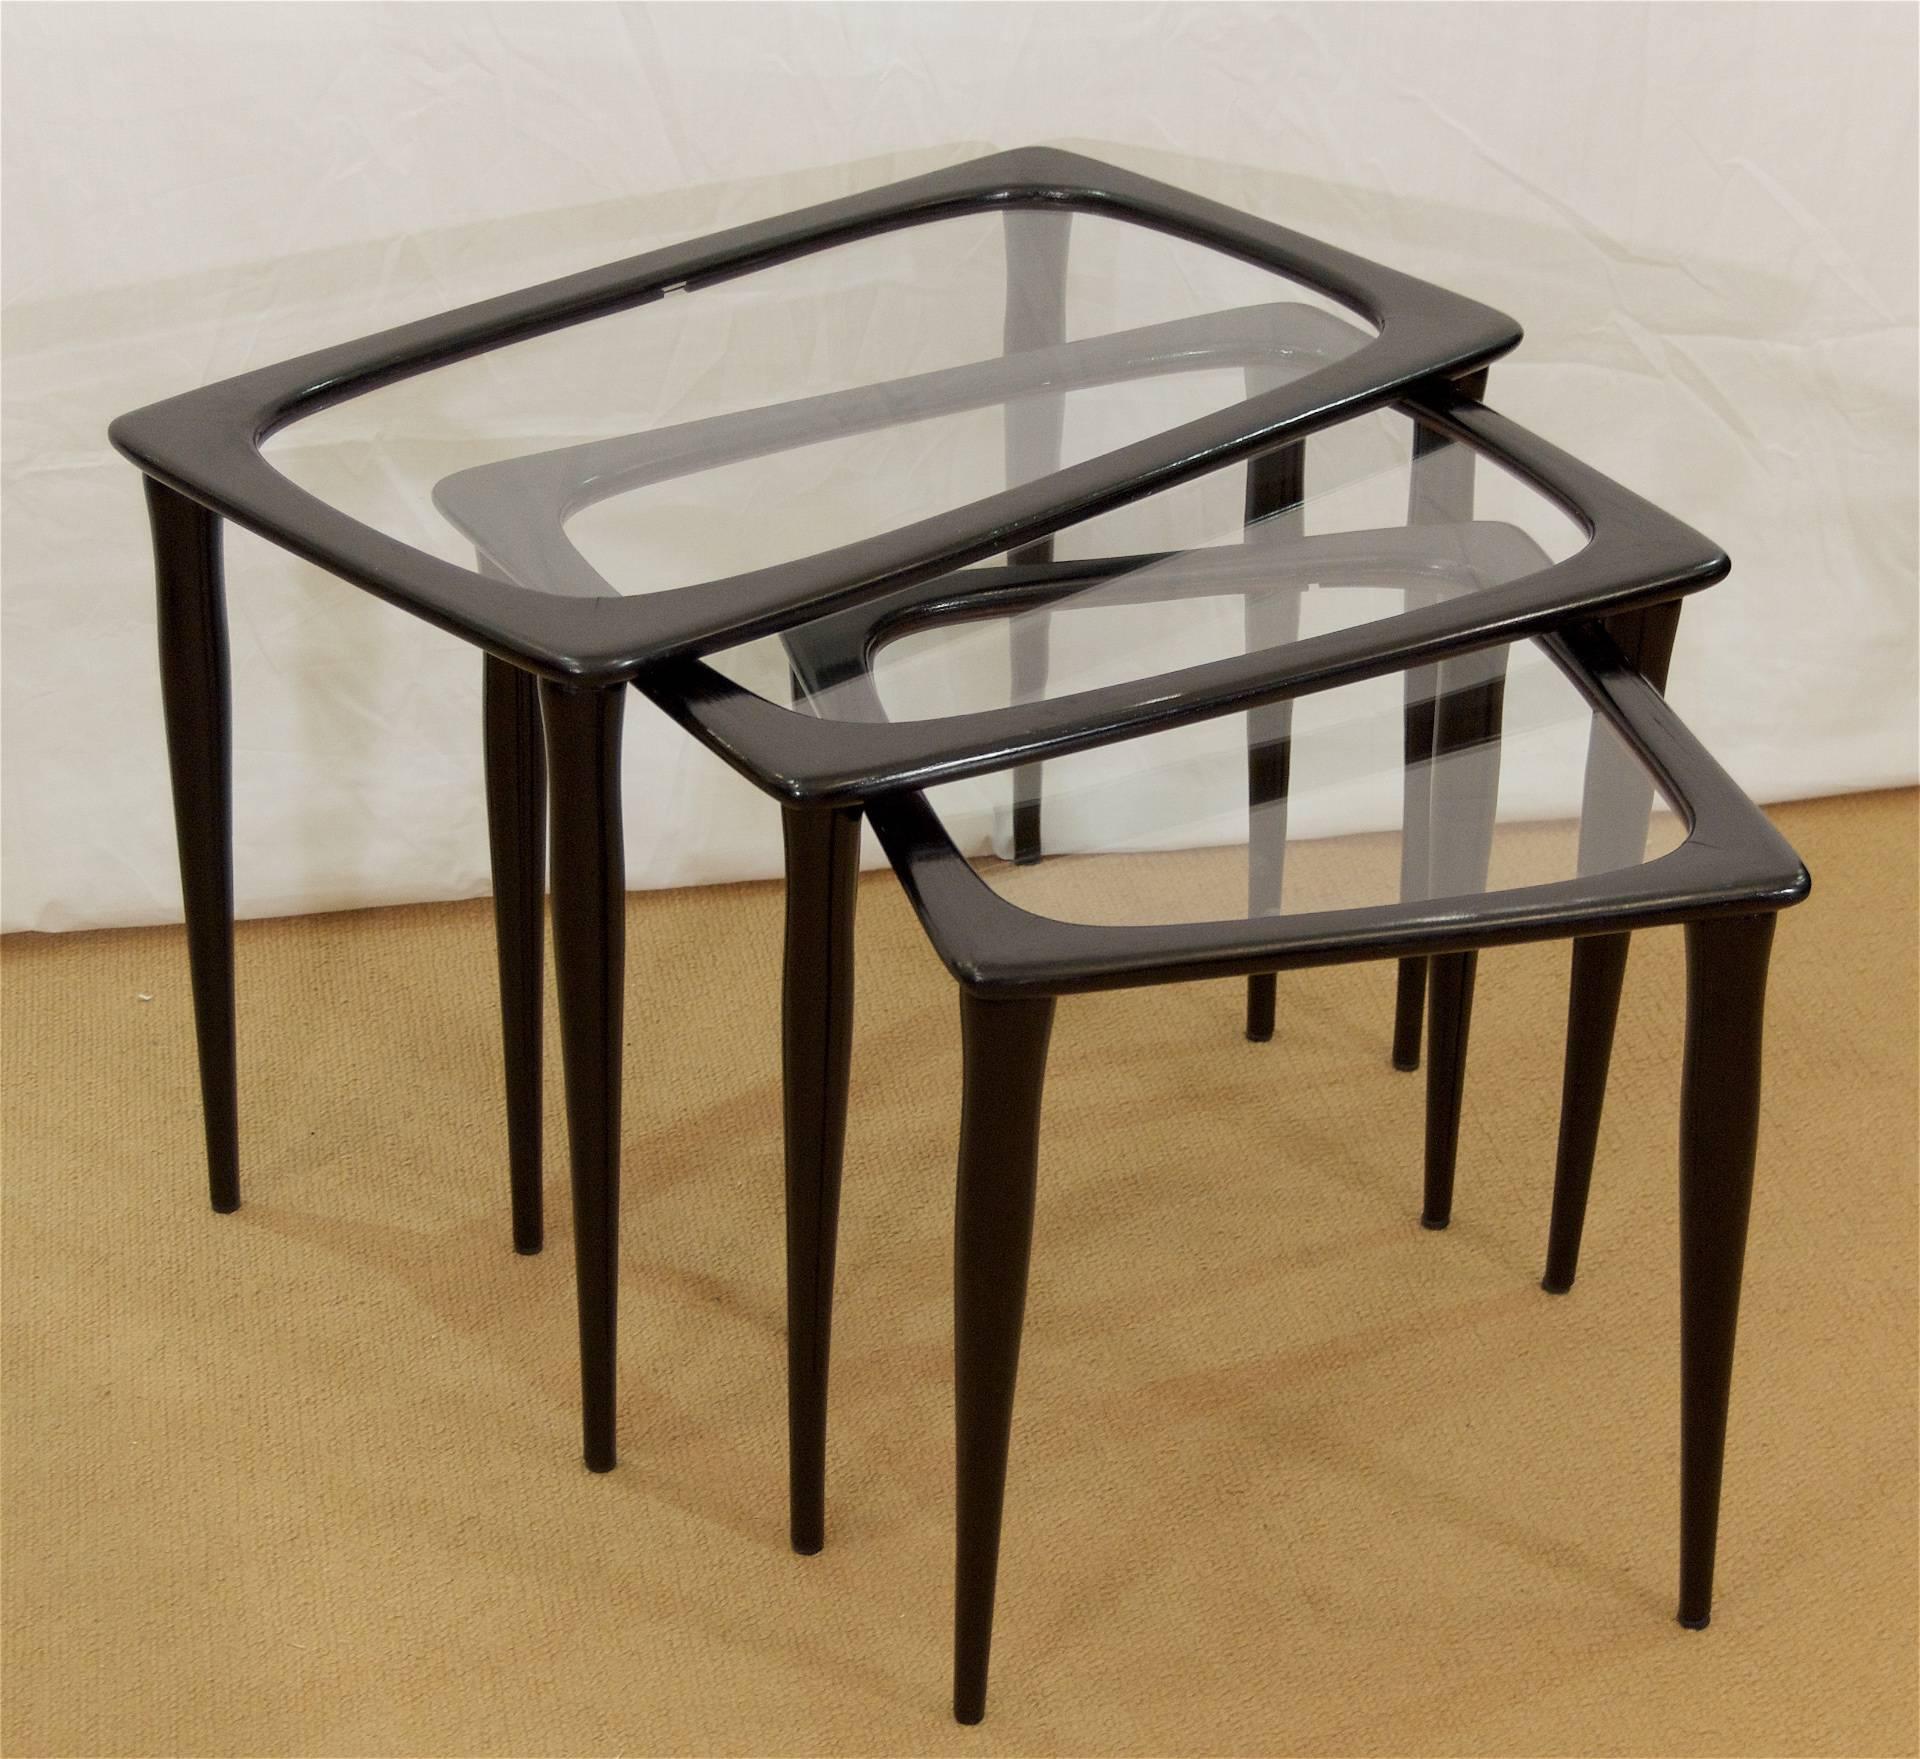 Excellently shaped set of three nesting tables in ebonized wood with glass centers and a gently curved structure to the wood frames, similar to Ico Parisi style. Dimensions given are of largest. Measure: Medium table measures 20.25 x 14.75 x